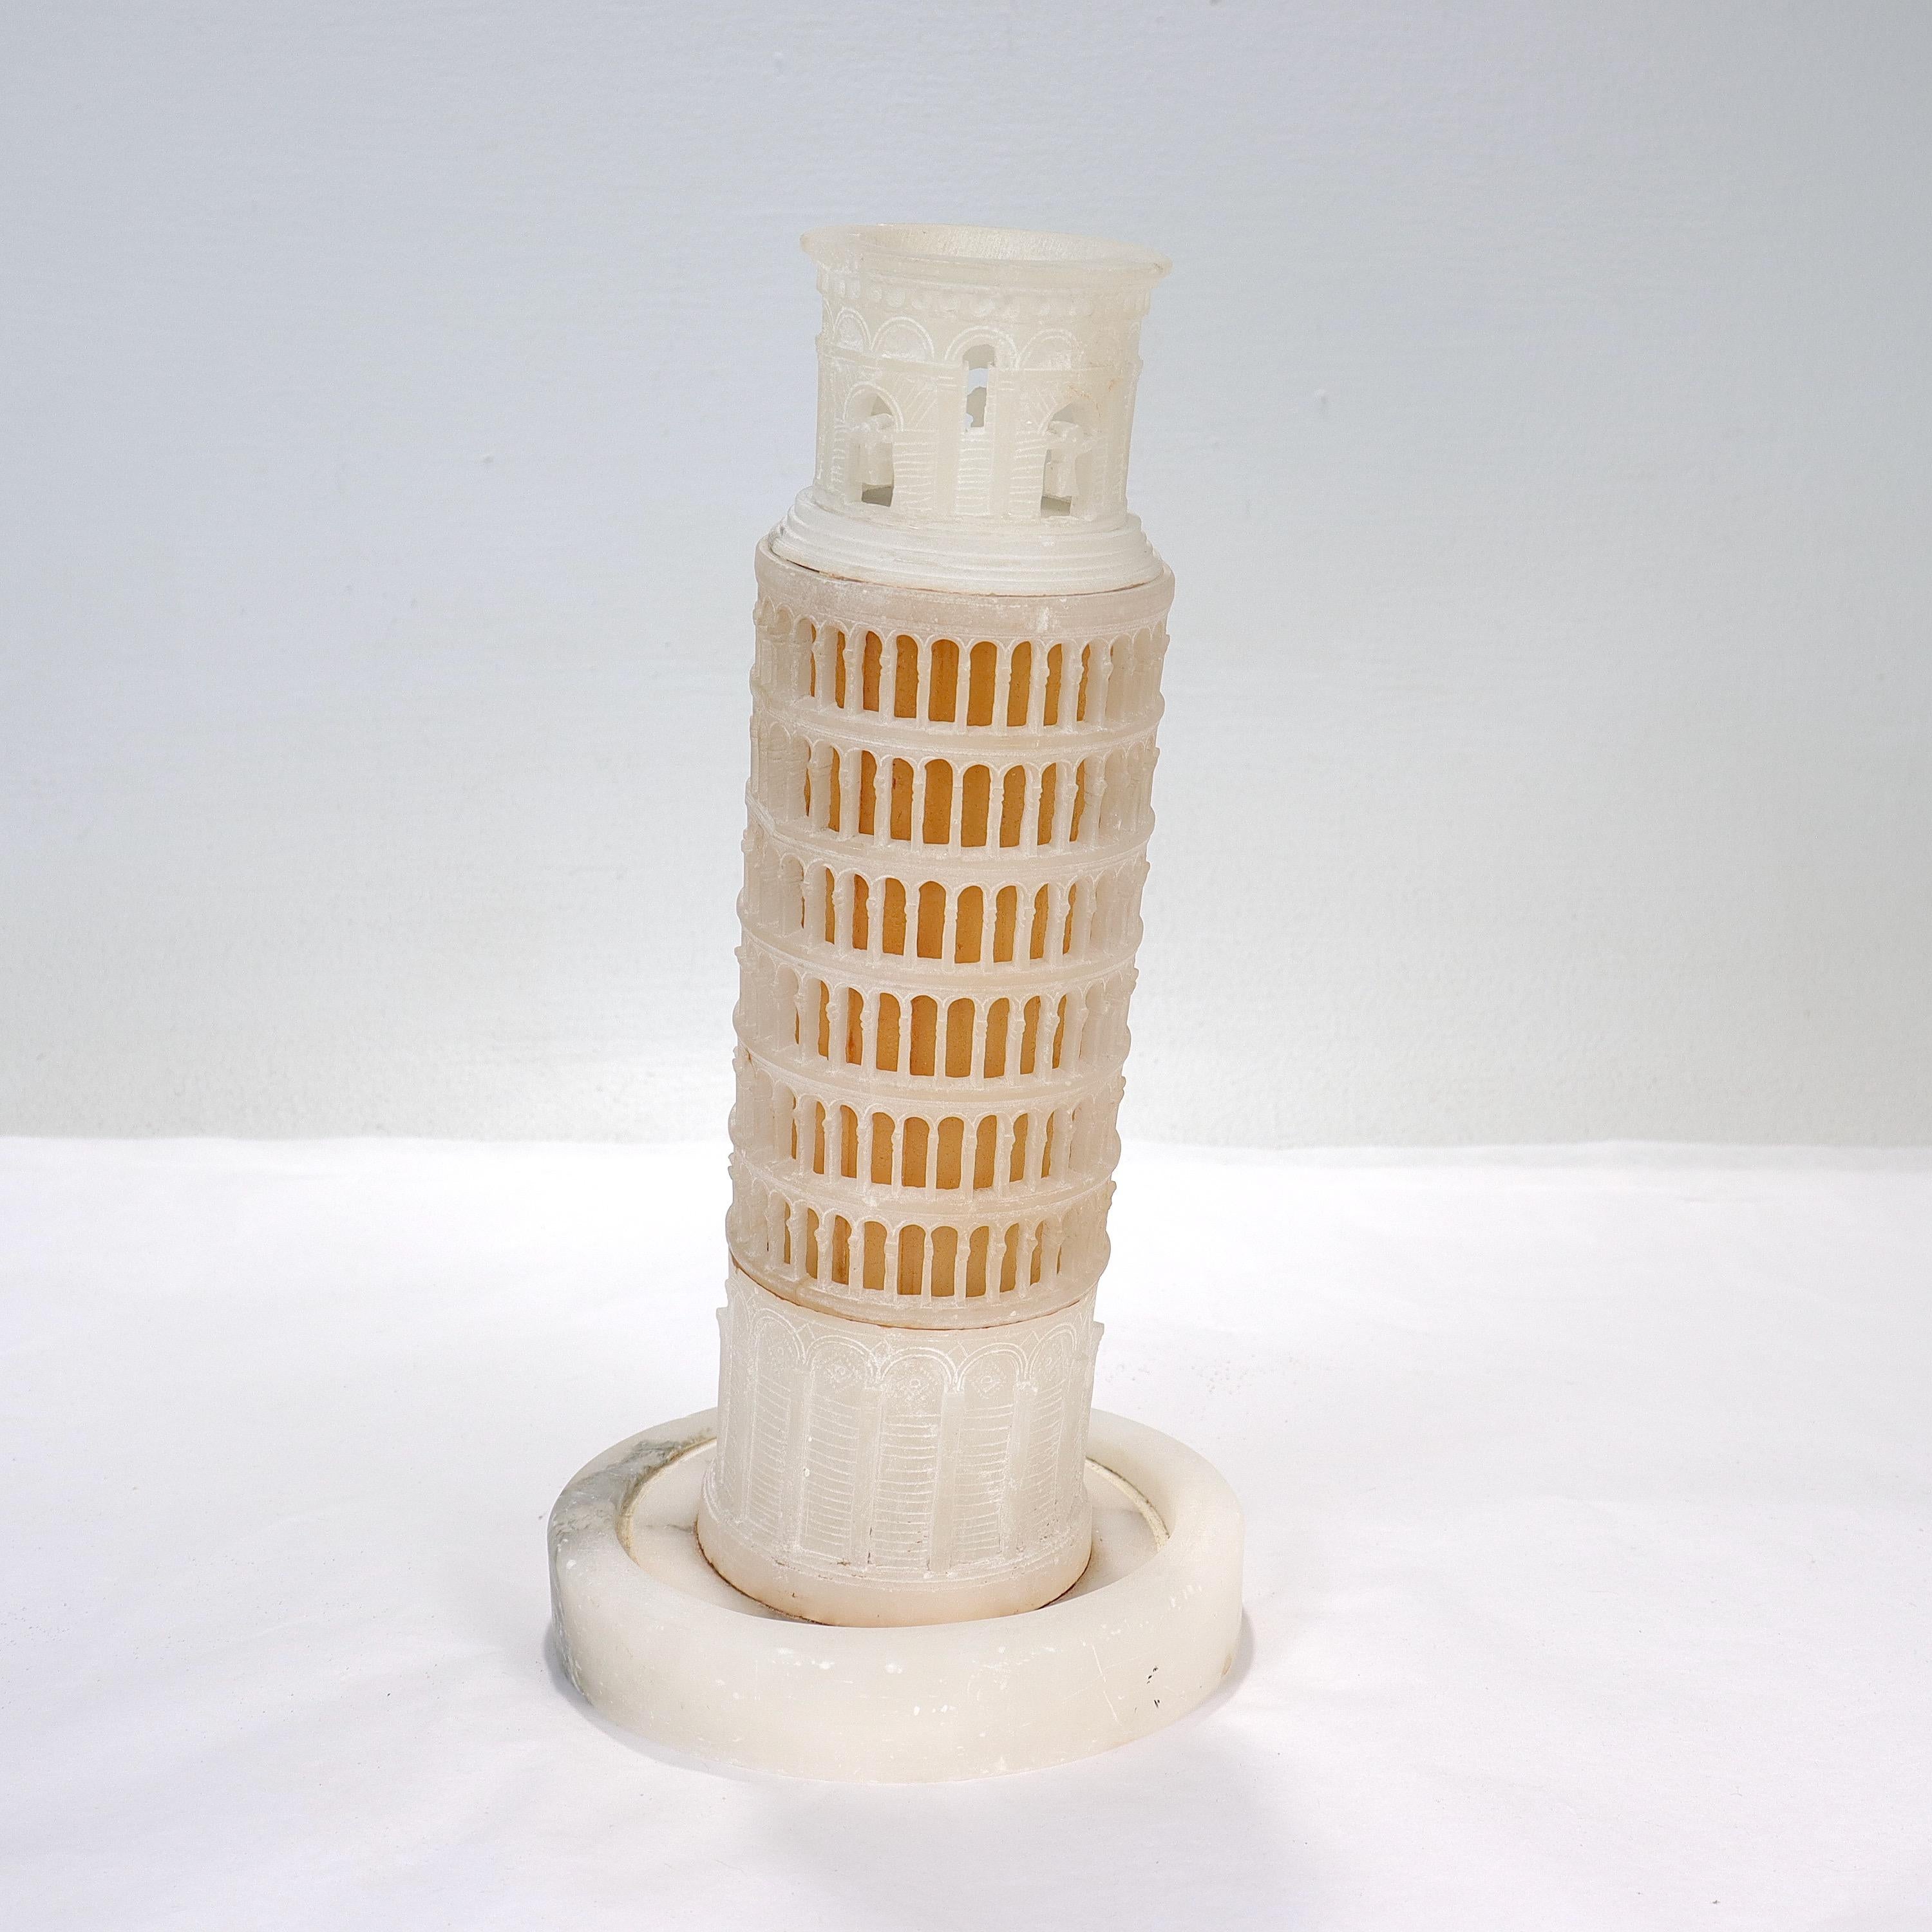 Hand-Carved Old or Antique Grand Tour Style Alabaster Leaning Tower of Pisa Sculpture